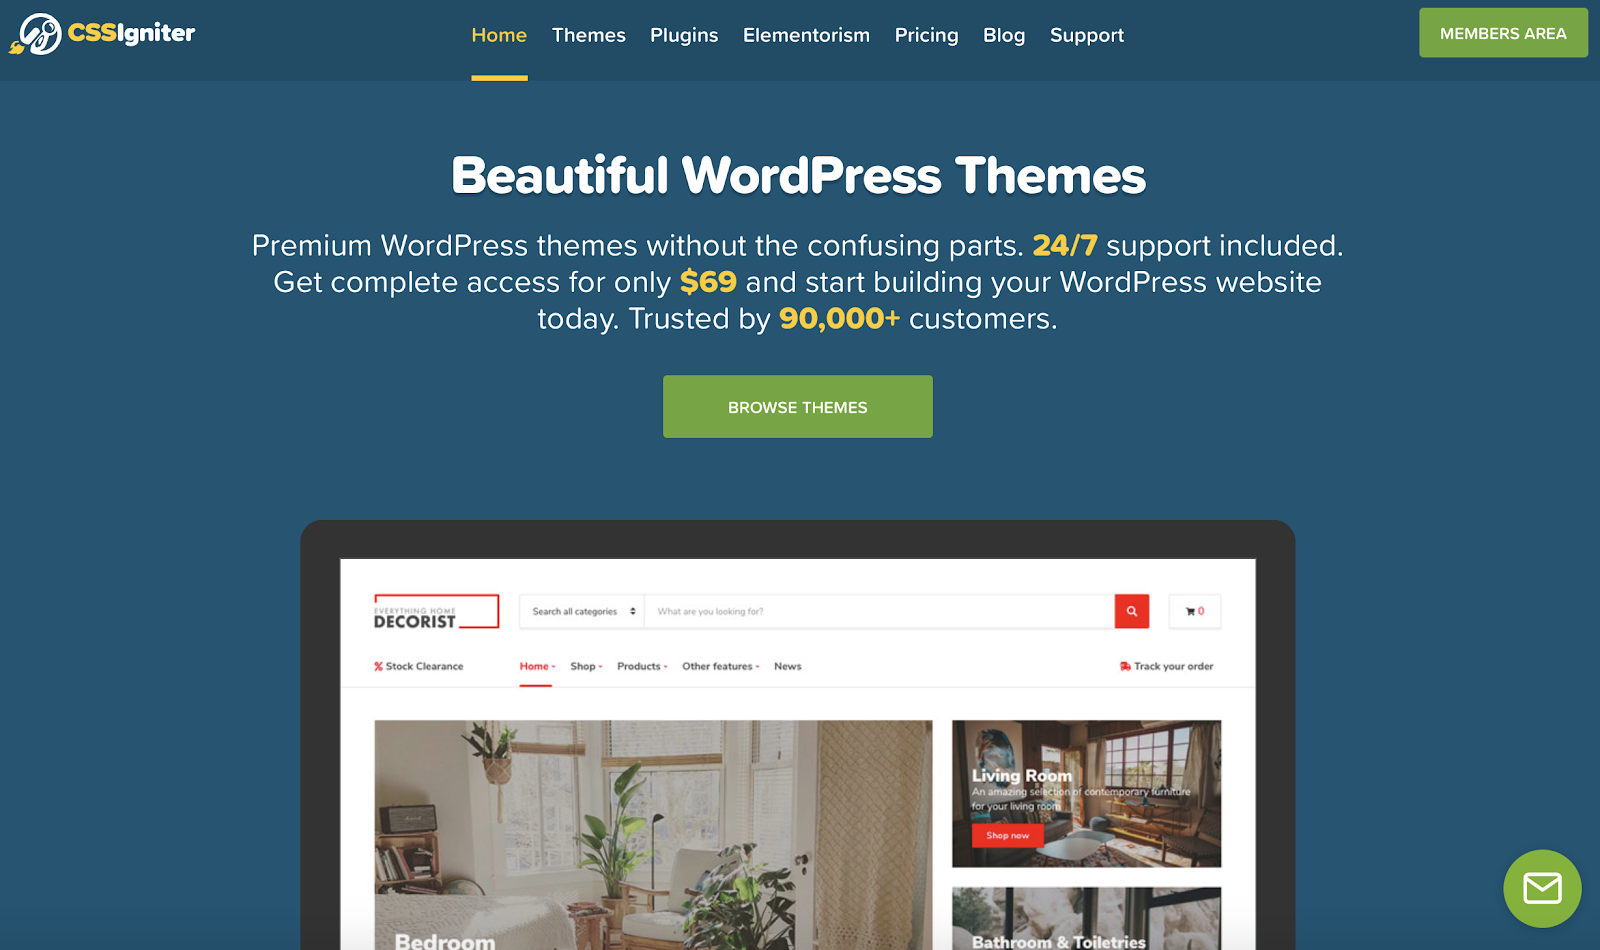 CSSIgniter Wordpress Themes are great for a multitude of reasons and, with over 90,000 happy customers, you know you’ll be getting your money’s worth. 
